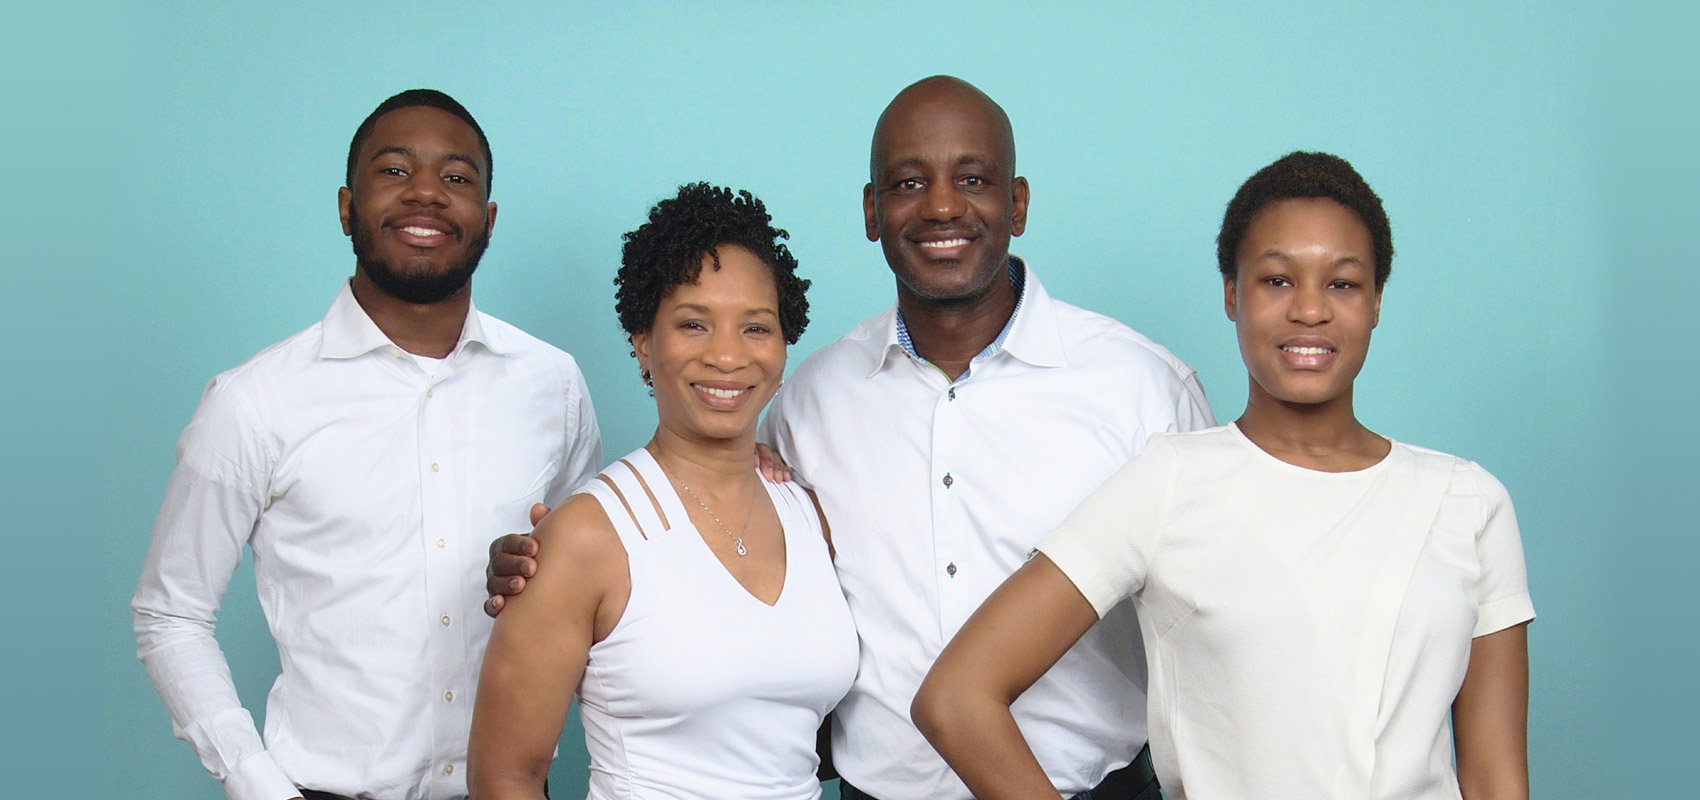 The DeVese Family in white shirts - Cynthia, her husband, daughter, and son